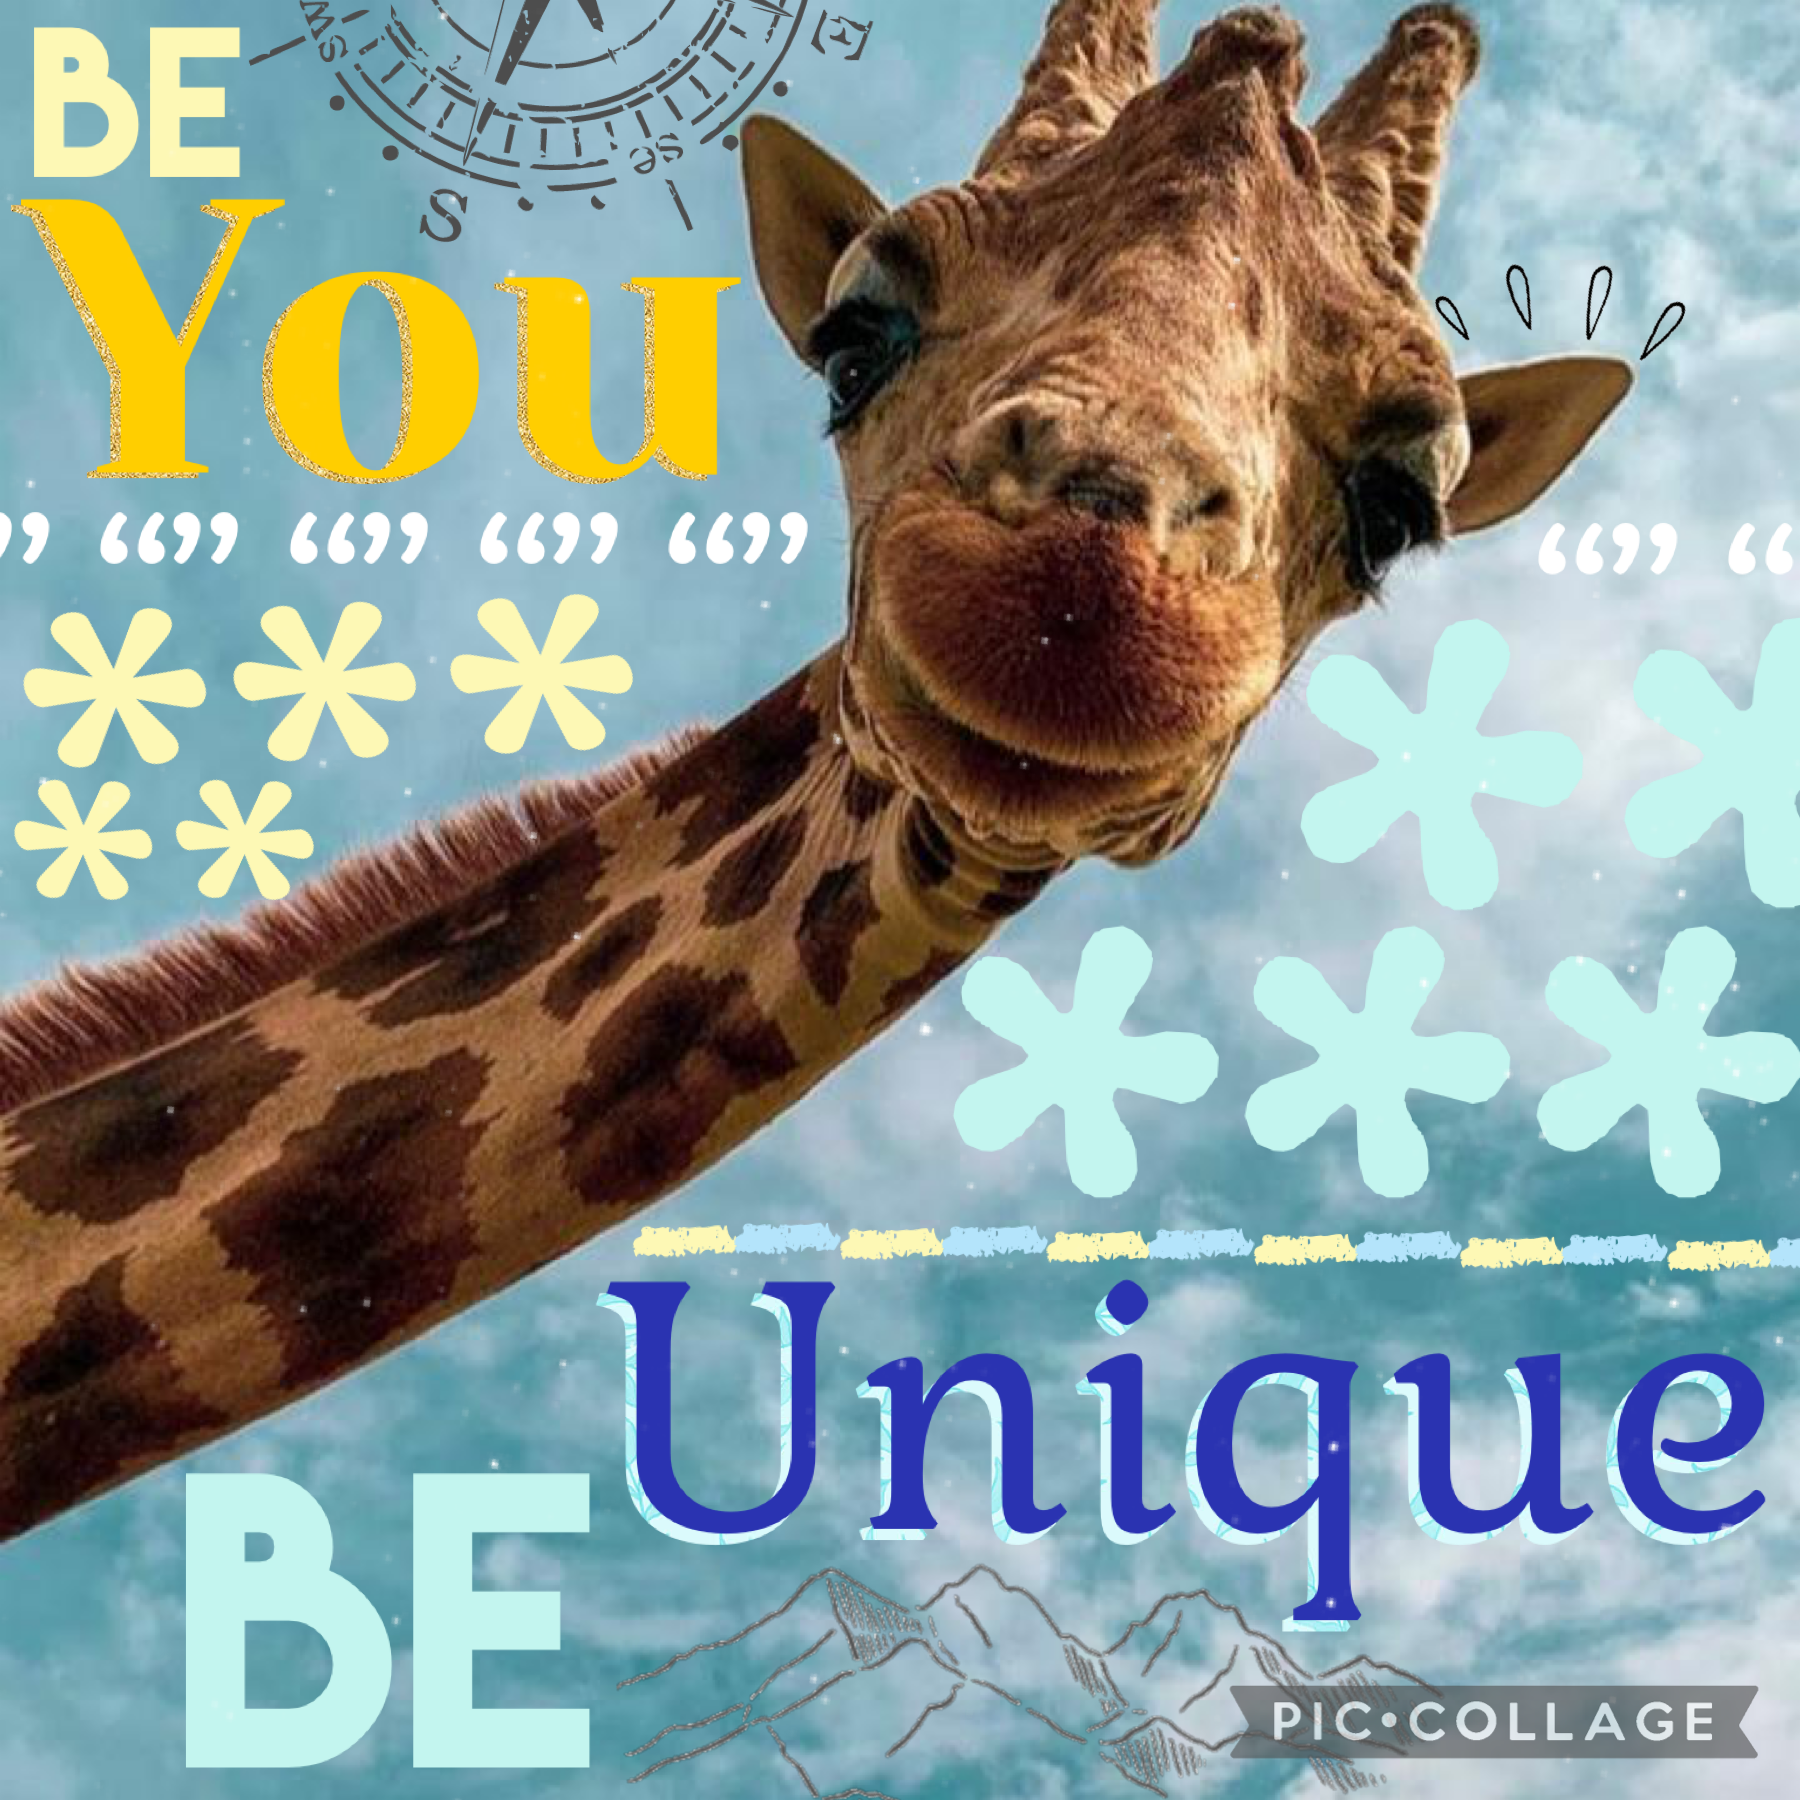 ❤️✨🦒 tap🦒 ✨❤️
Yet again another animal post!
The message of it is for y’all for whom ever sees this. 
So keep it up 👍🏻 😃❤️✨✨